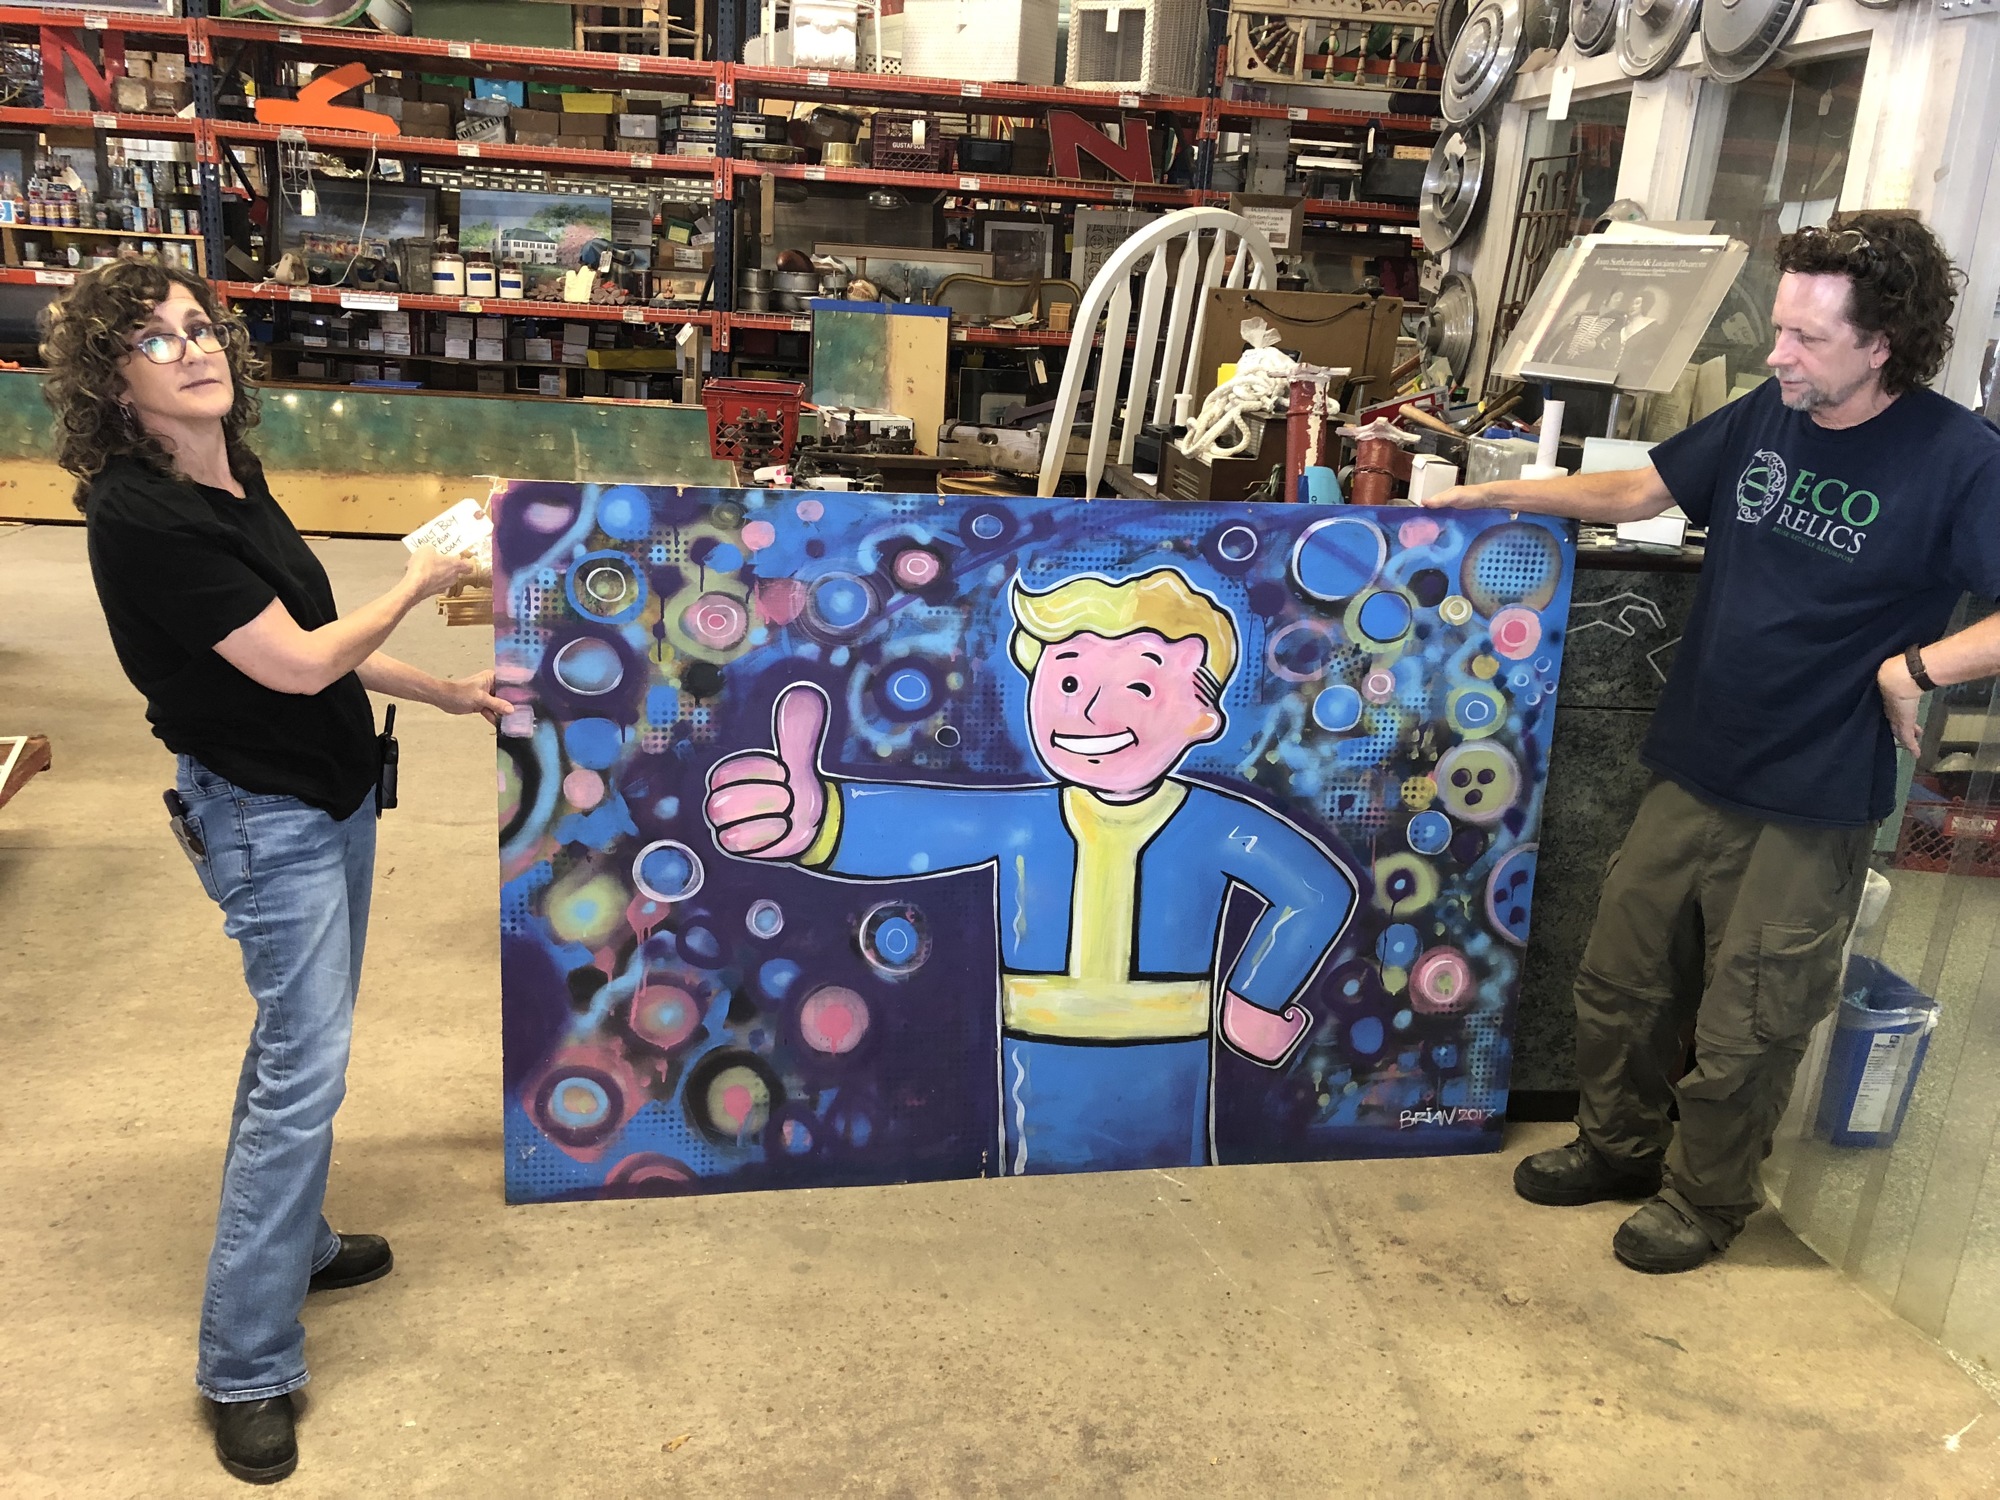 Eco Relics owners Annie and Michael Murphy with the mural of Vault Boy from the Fallout video game series.